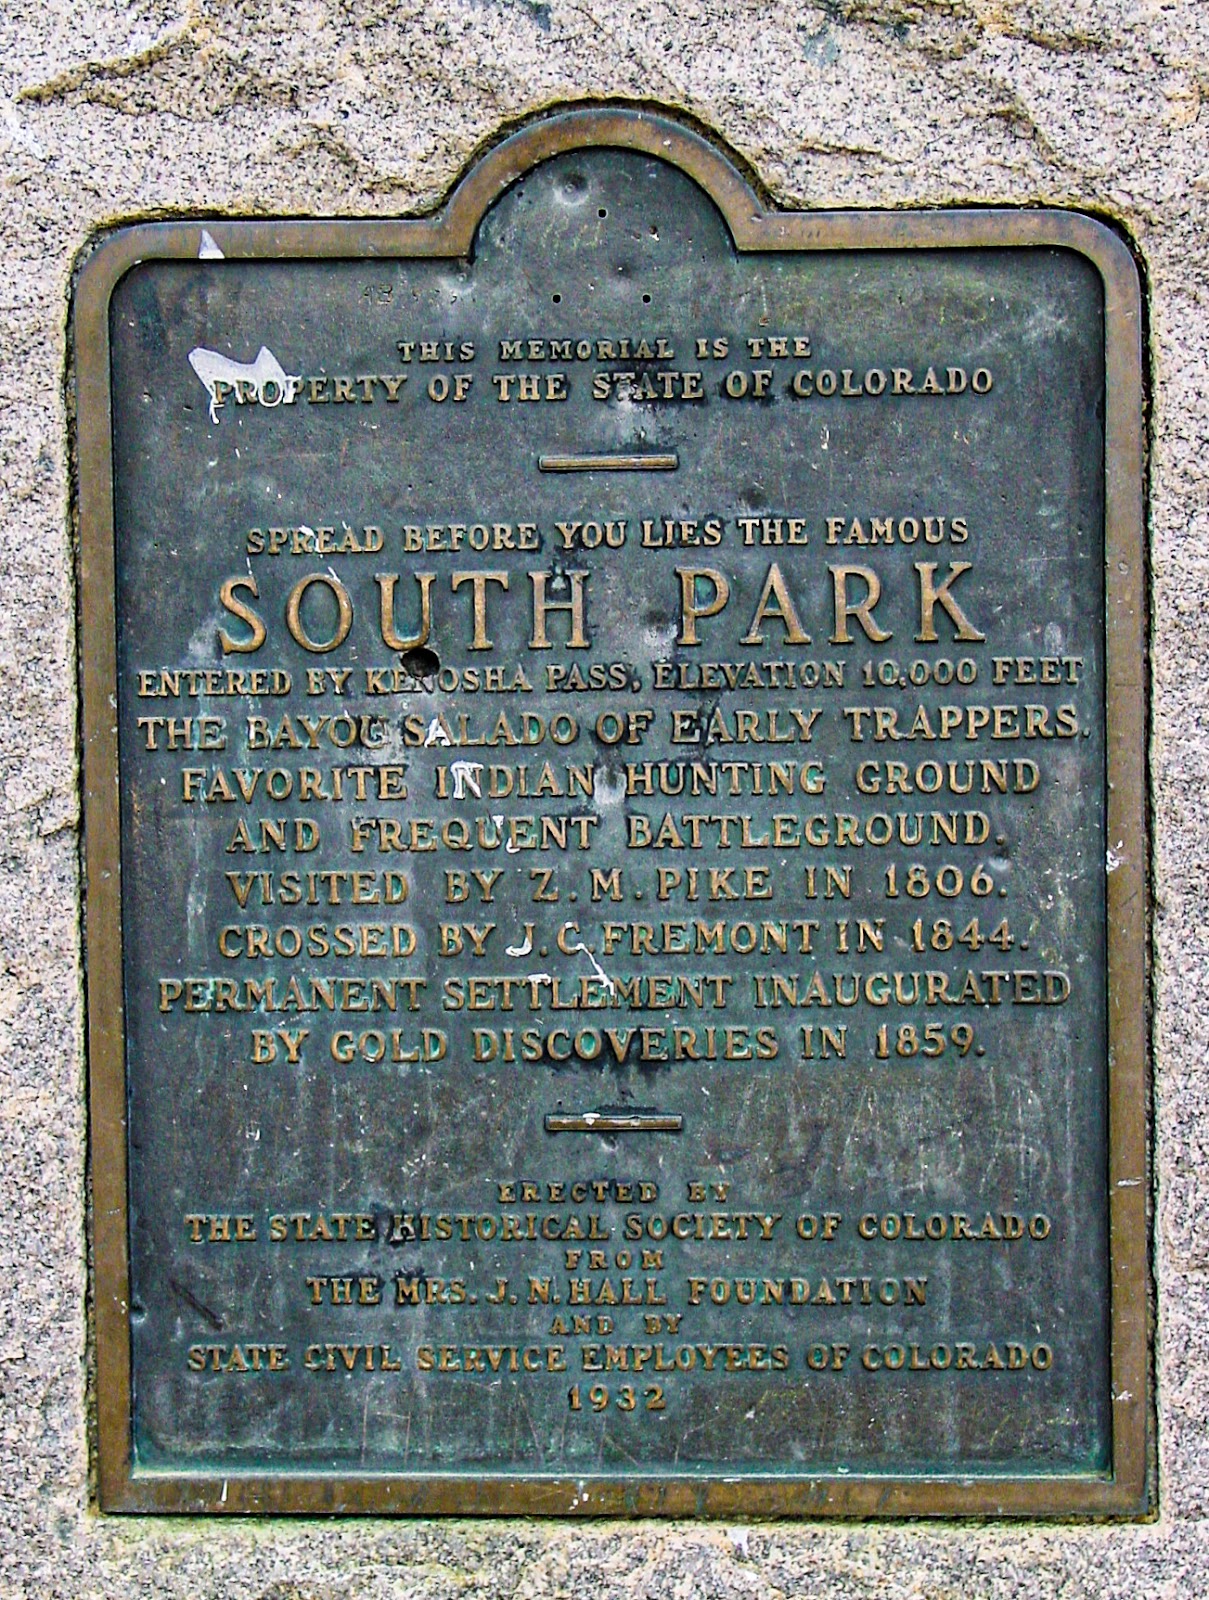 The marker says:

THIS MEMORIAL IS THE PROPERTY OF THE STATE OF COLORADO
---------
SPREAD BEFORE YOU LIES THE FAMOUS
SOUTH PARK
ENTERED BY KENOSHA PASS ELEVATION 10,000 FEET. 
THE BAYOU SALADO OF EARLY TRAPPERS
FAVORITE INDIAN HUNTING GROUND 
AND FREQUENT BATTLEGROUND 
VISITED BY Z. M. PIKE IN 1806
CROSSED BY J. C. FREMONT IN 1844
PERMANENT SETTLEMENT INAUGURATED
BY GOLD DISCOVERIES IN 1859
